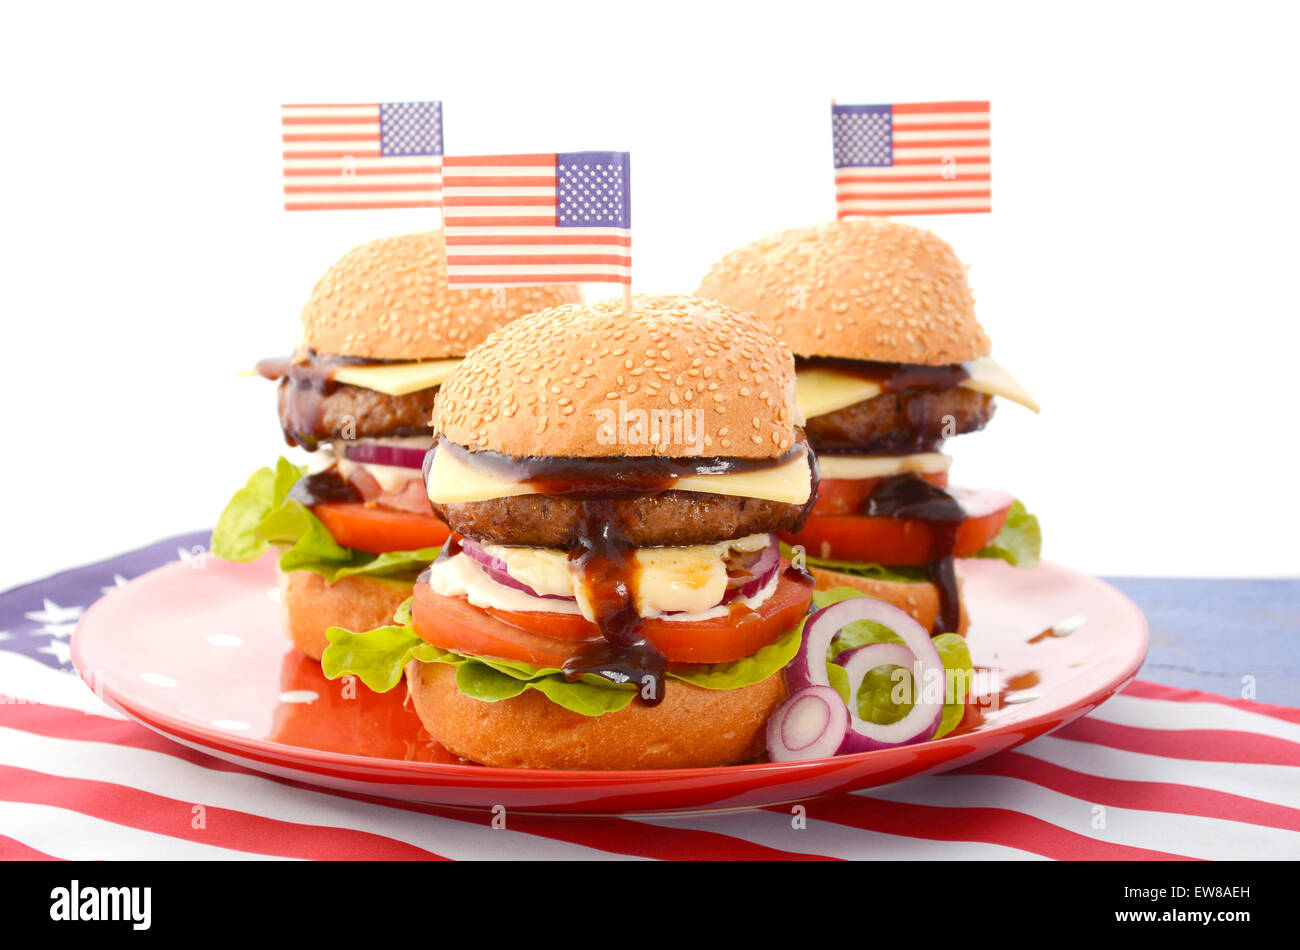 The Great BBQ Hamburger with American flags for USA Fourth of July and holiday events party celebrations. Stock Photo